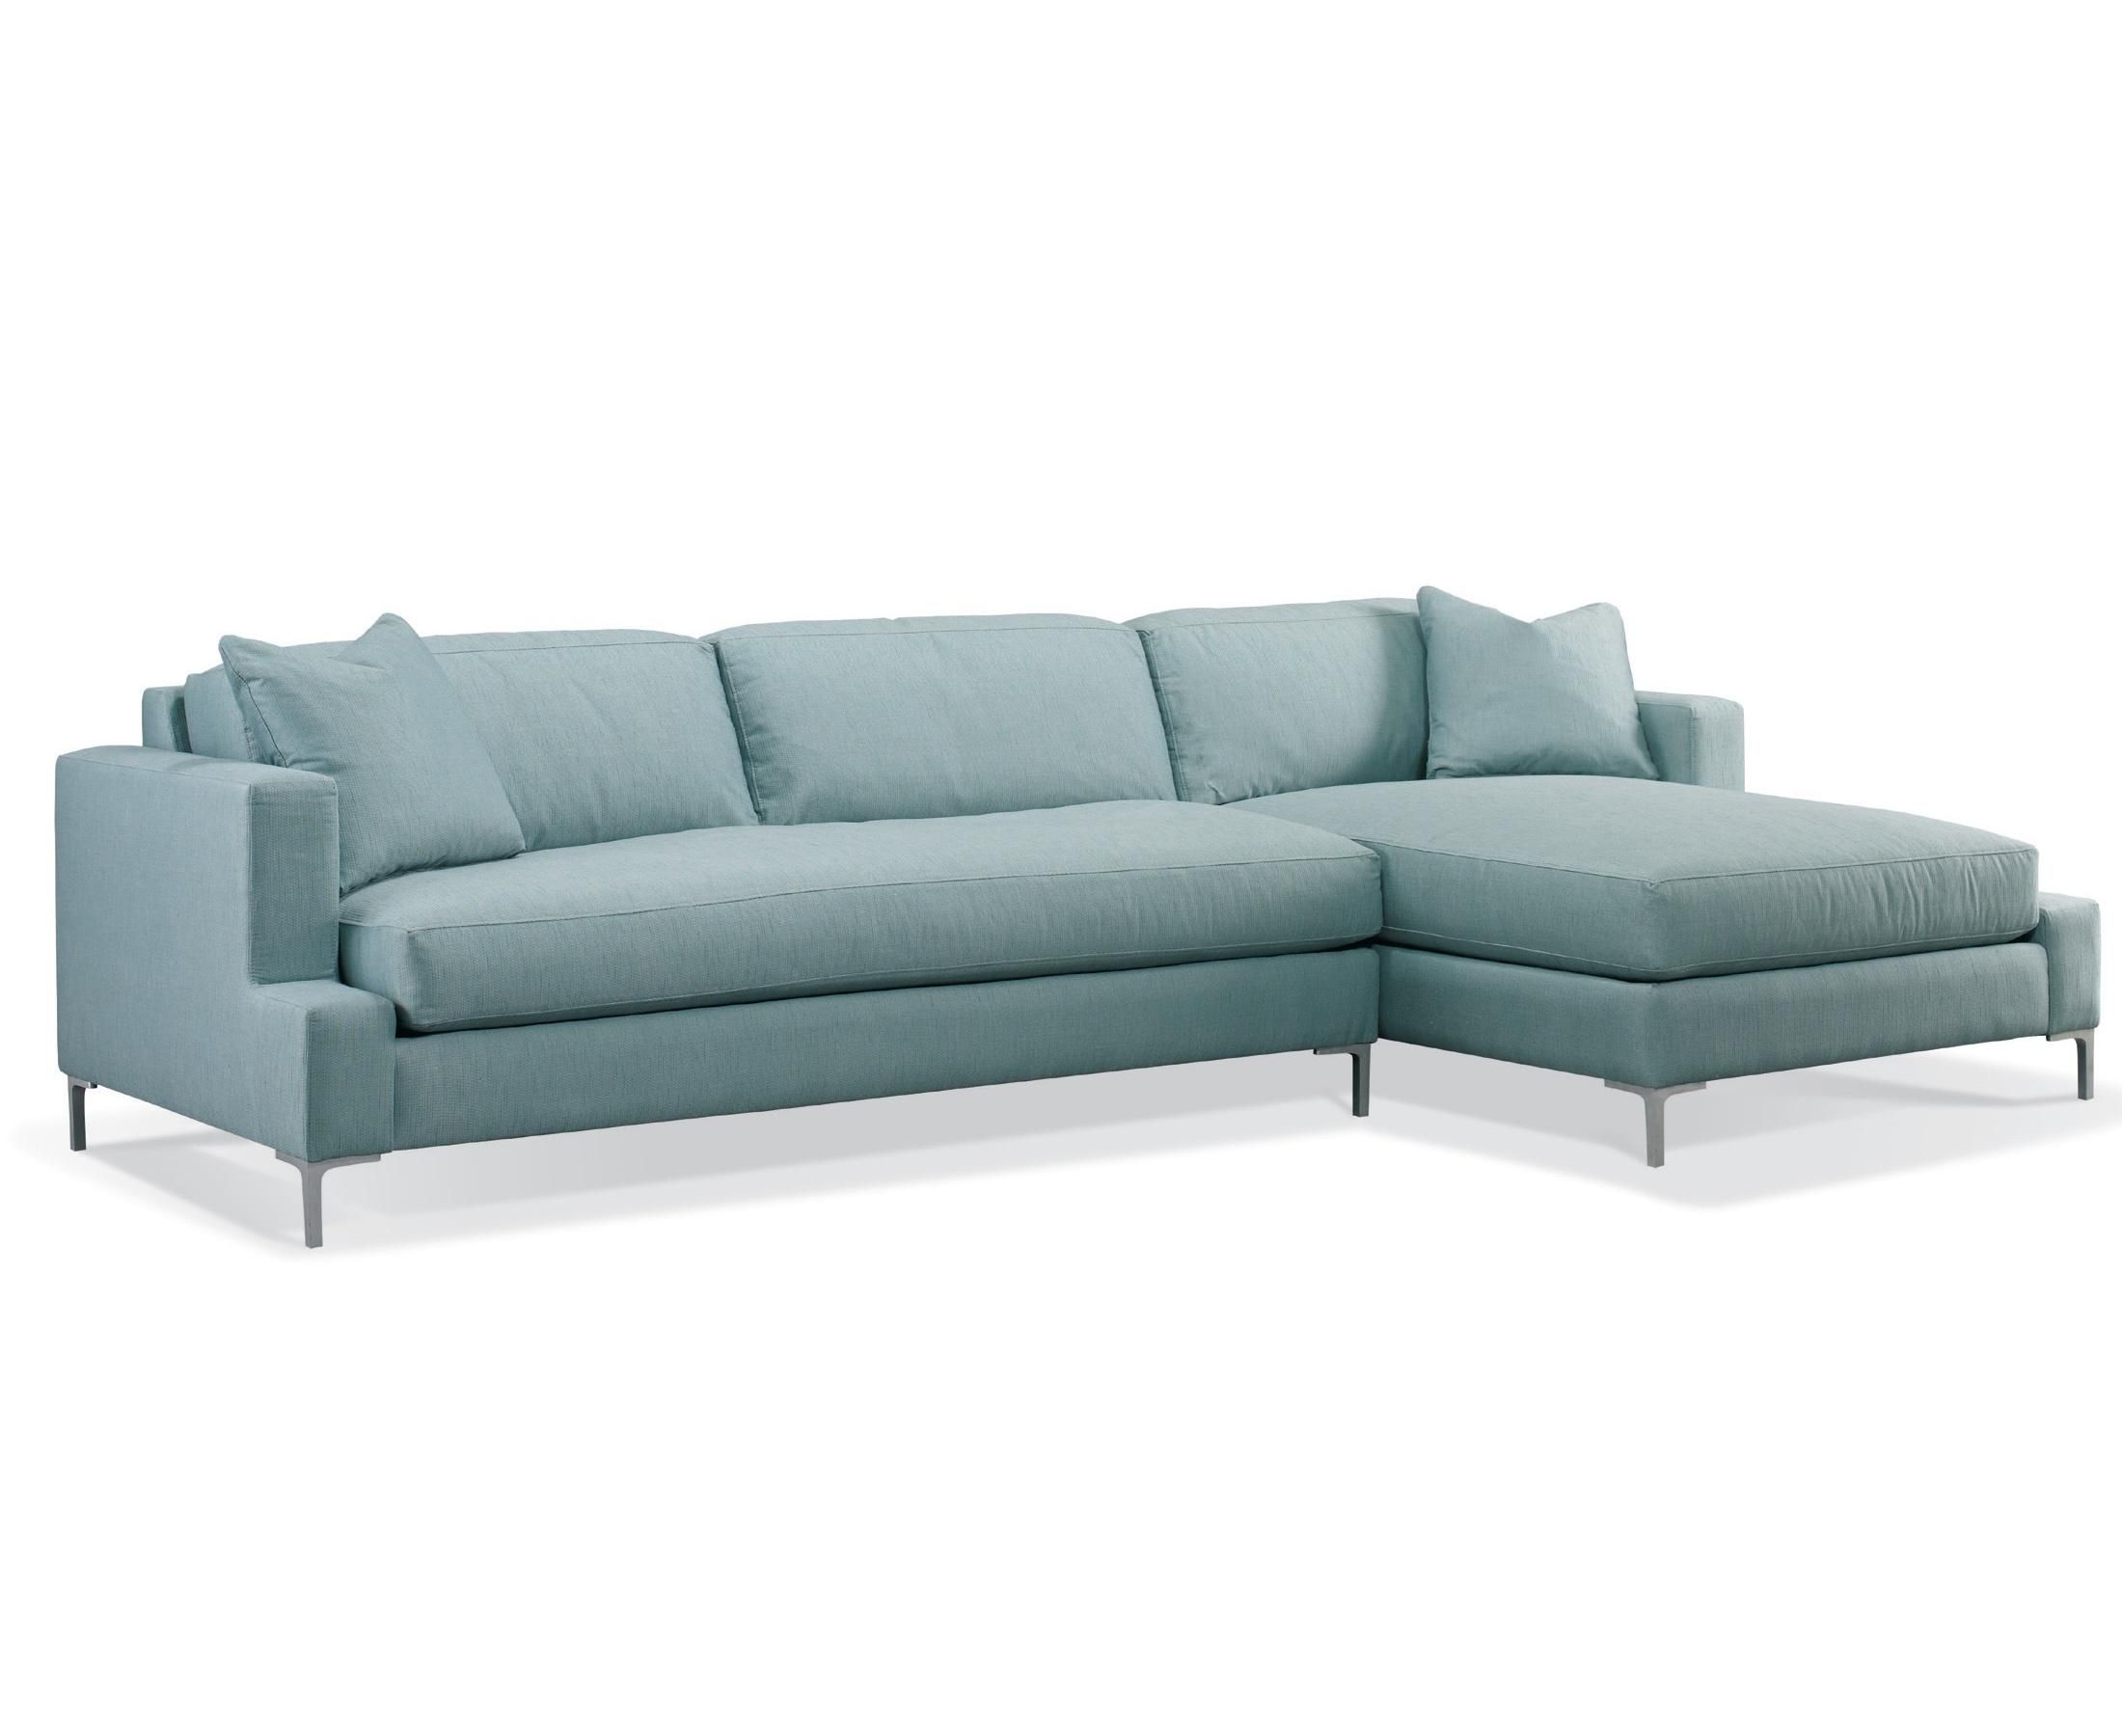 Sectional Sofa Couch With Chaise, Precedent – Luxury Furniture Mr Within Precedent Sofas (View 15 of 20)